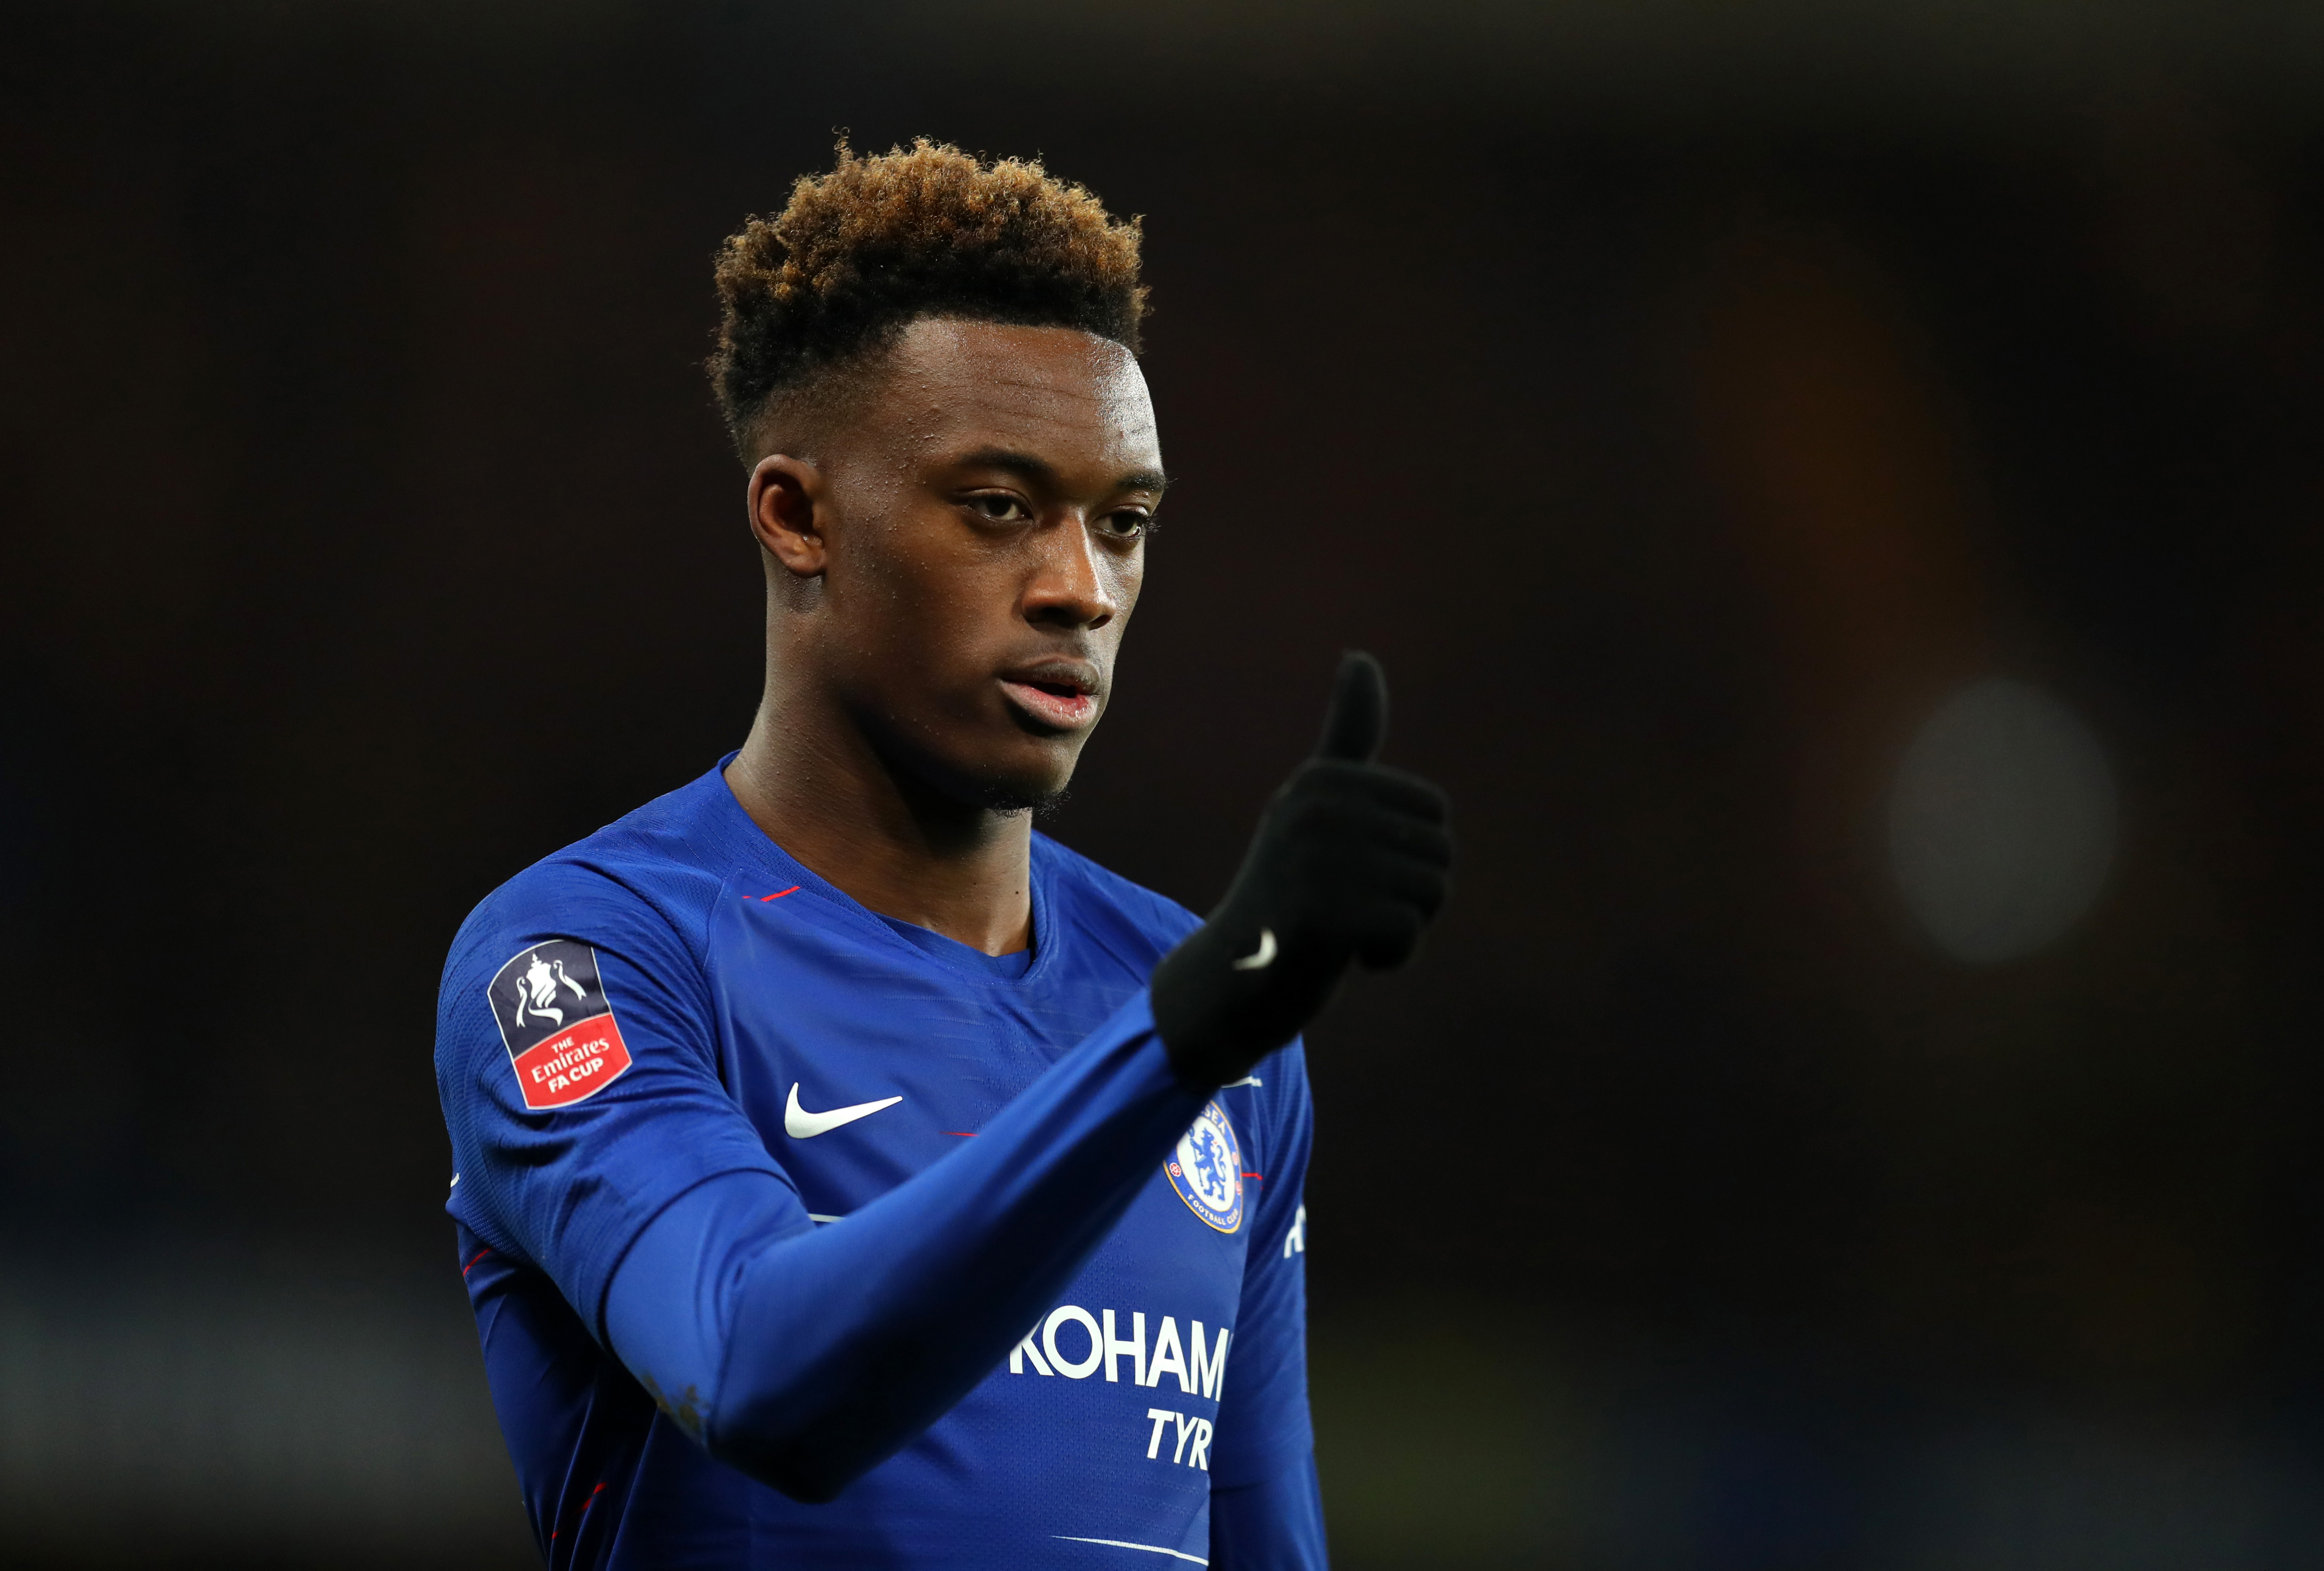 Chelsea's other youngster, Callum Hudson-Odoi is subject to interest from Bayern Munich. (Photo courtesy: AFP/Getty)